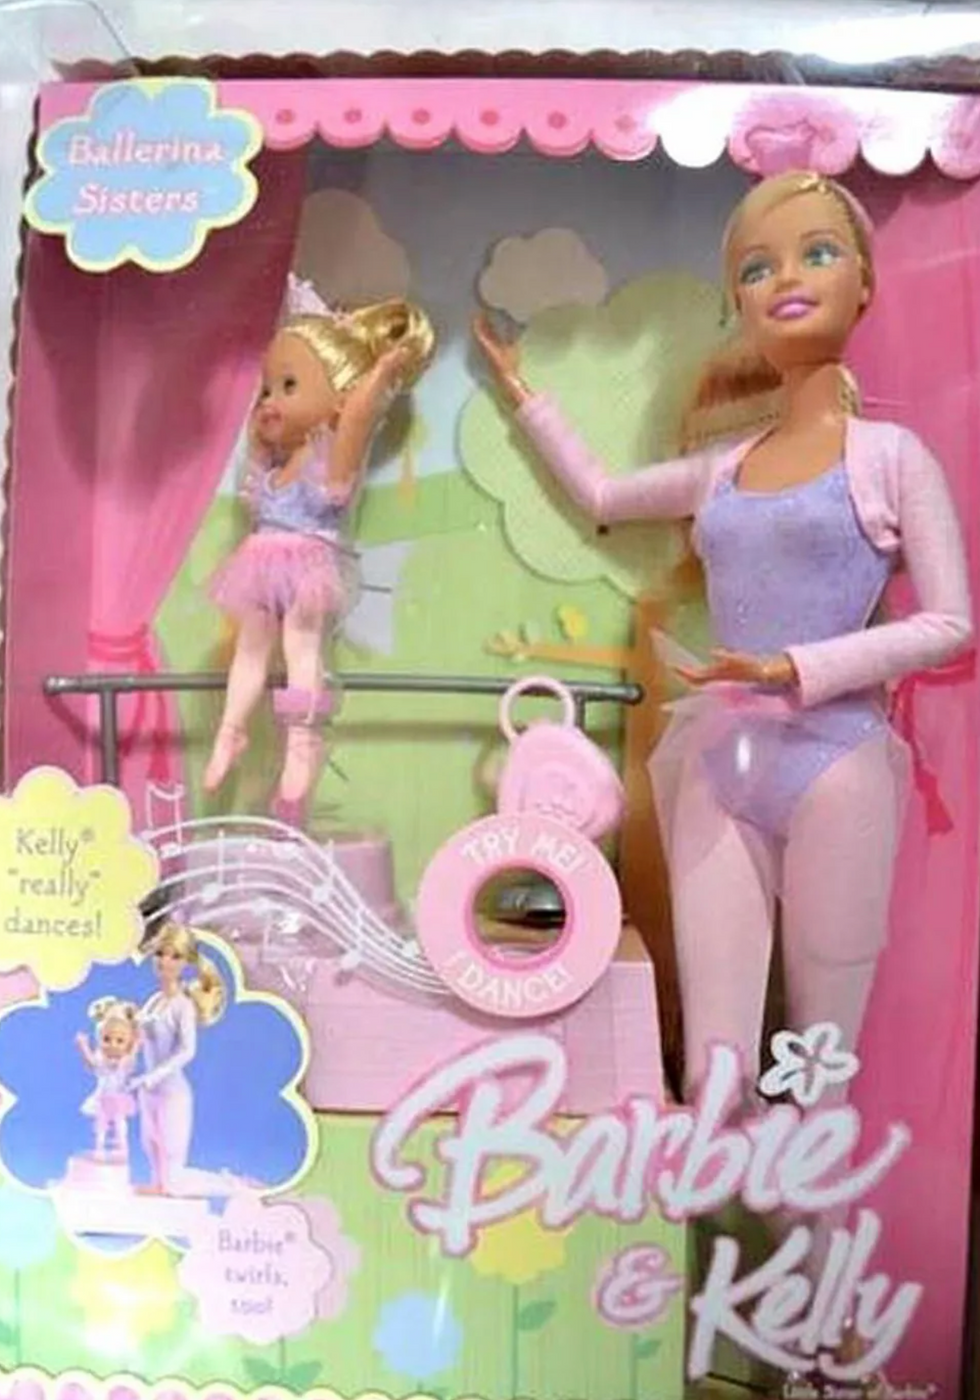 Barbie and Kelly Ballerina sisters